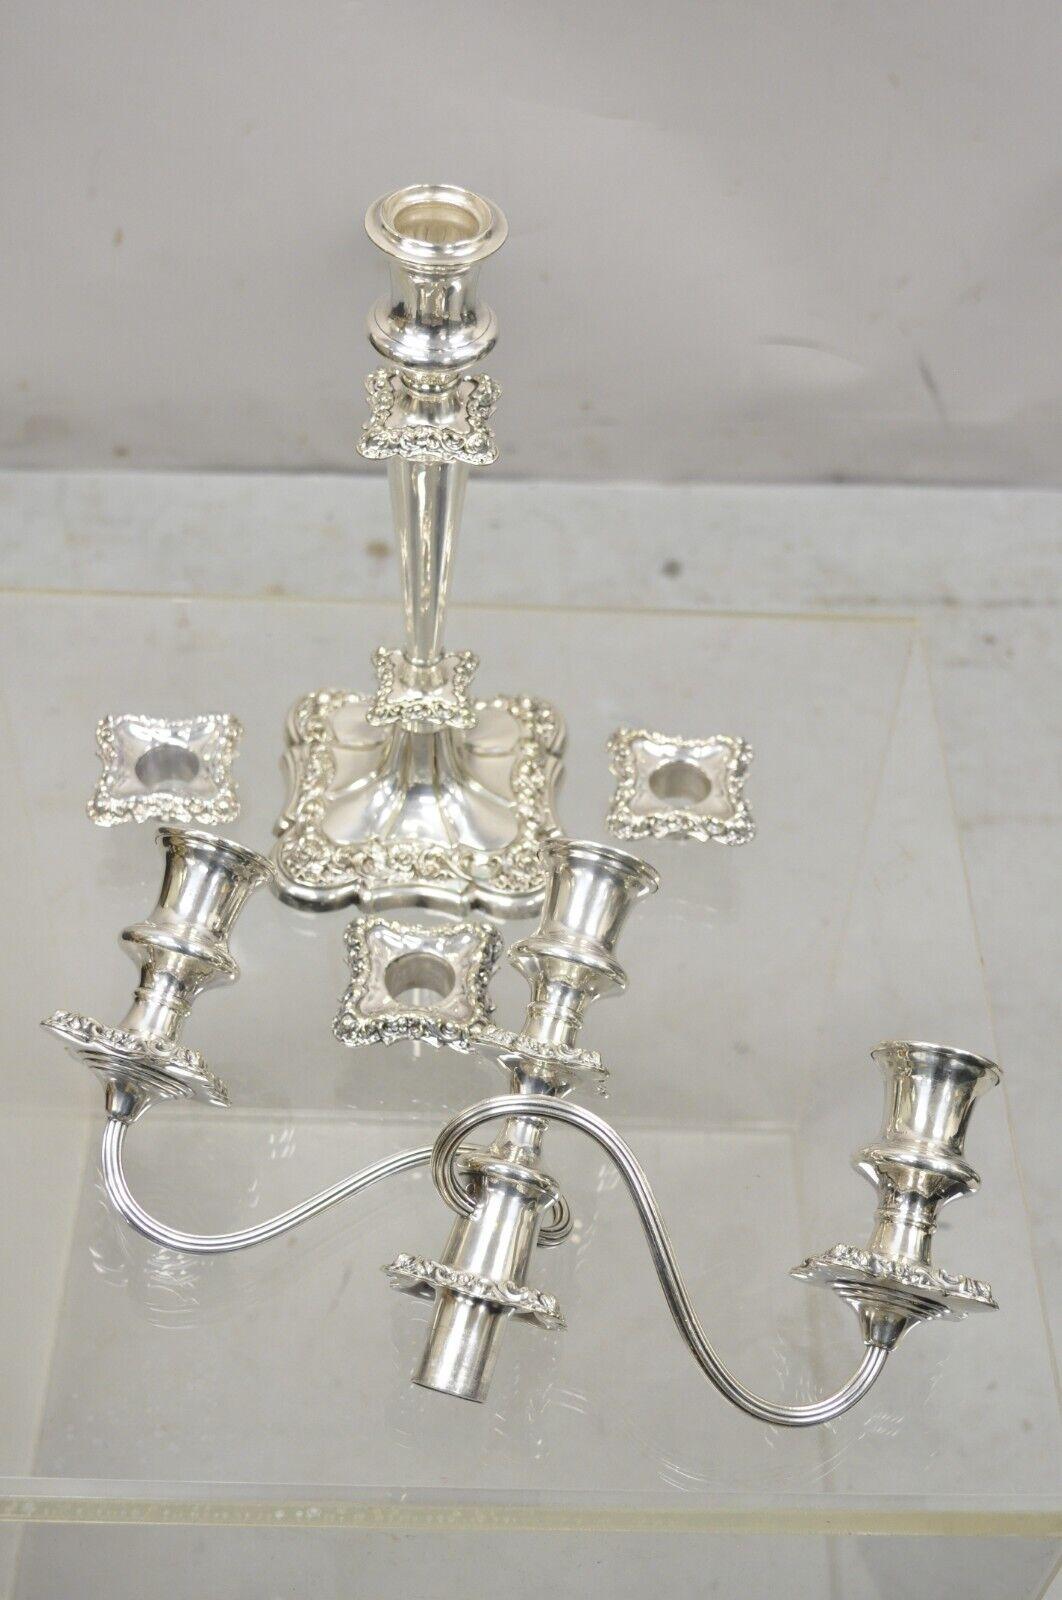 Antique Gorham Floral Repousse Twin Arm Silver Plated Candlestick Candelabra For Sale 4